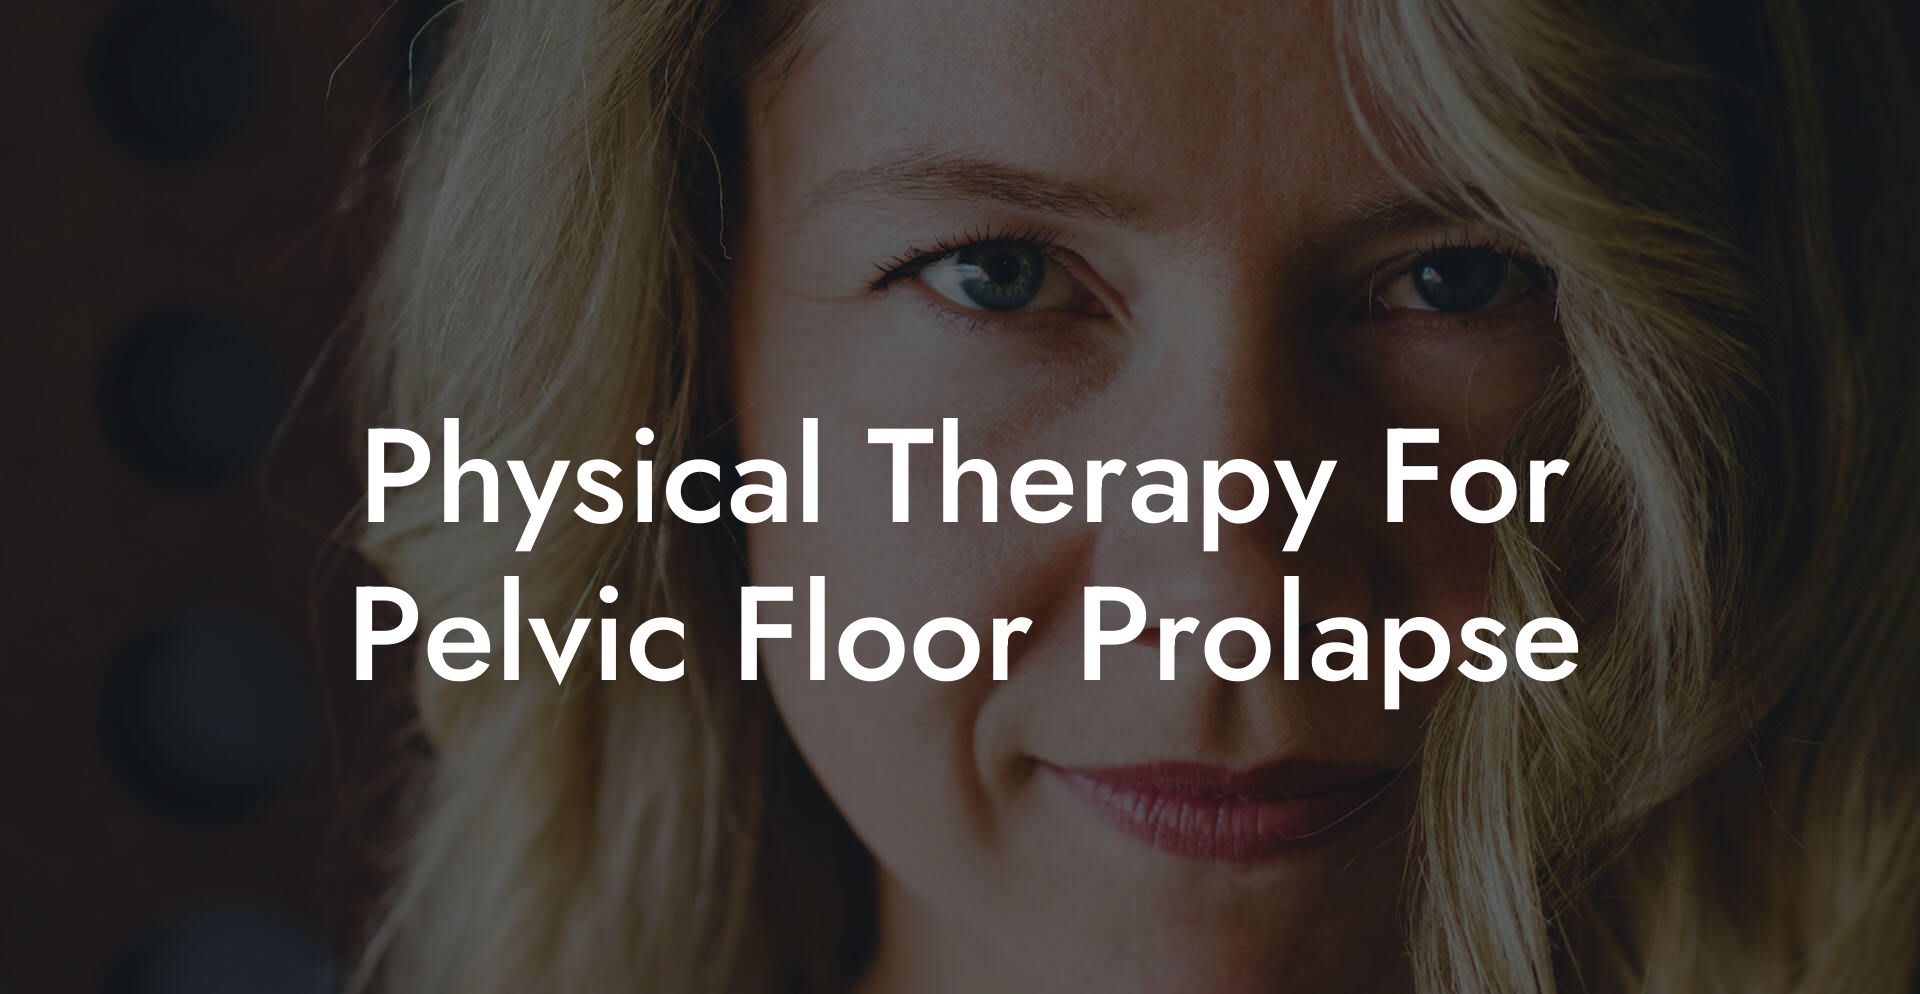 Physical Therapy For Pelvic Floor Prolapse